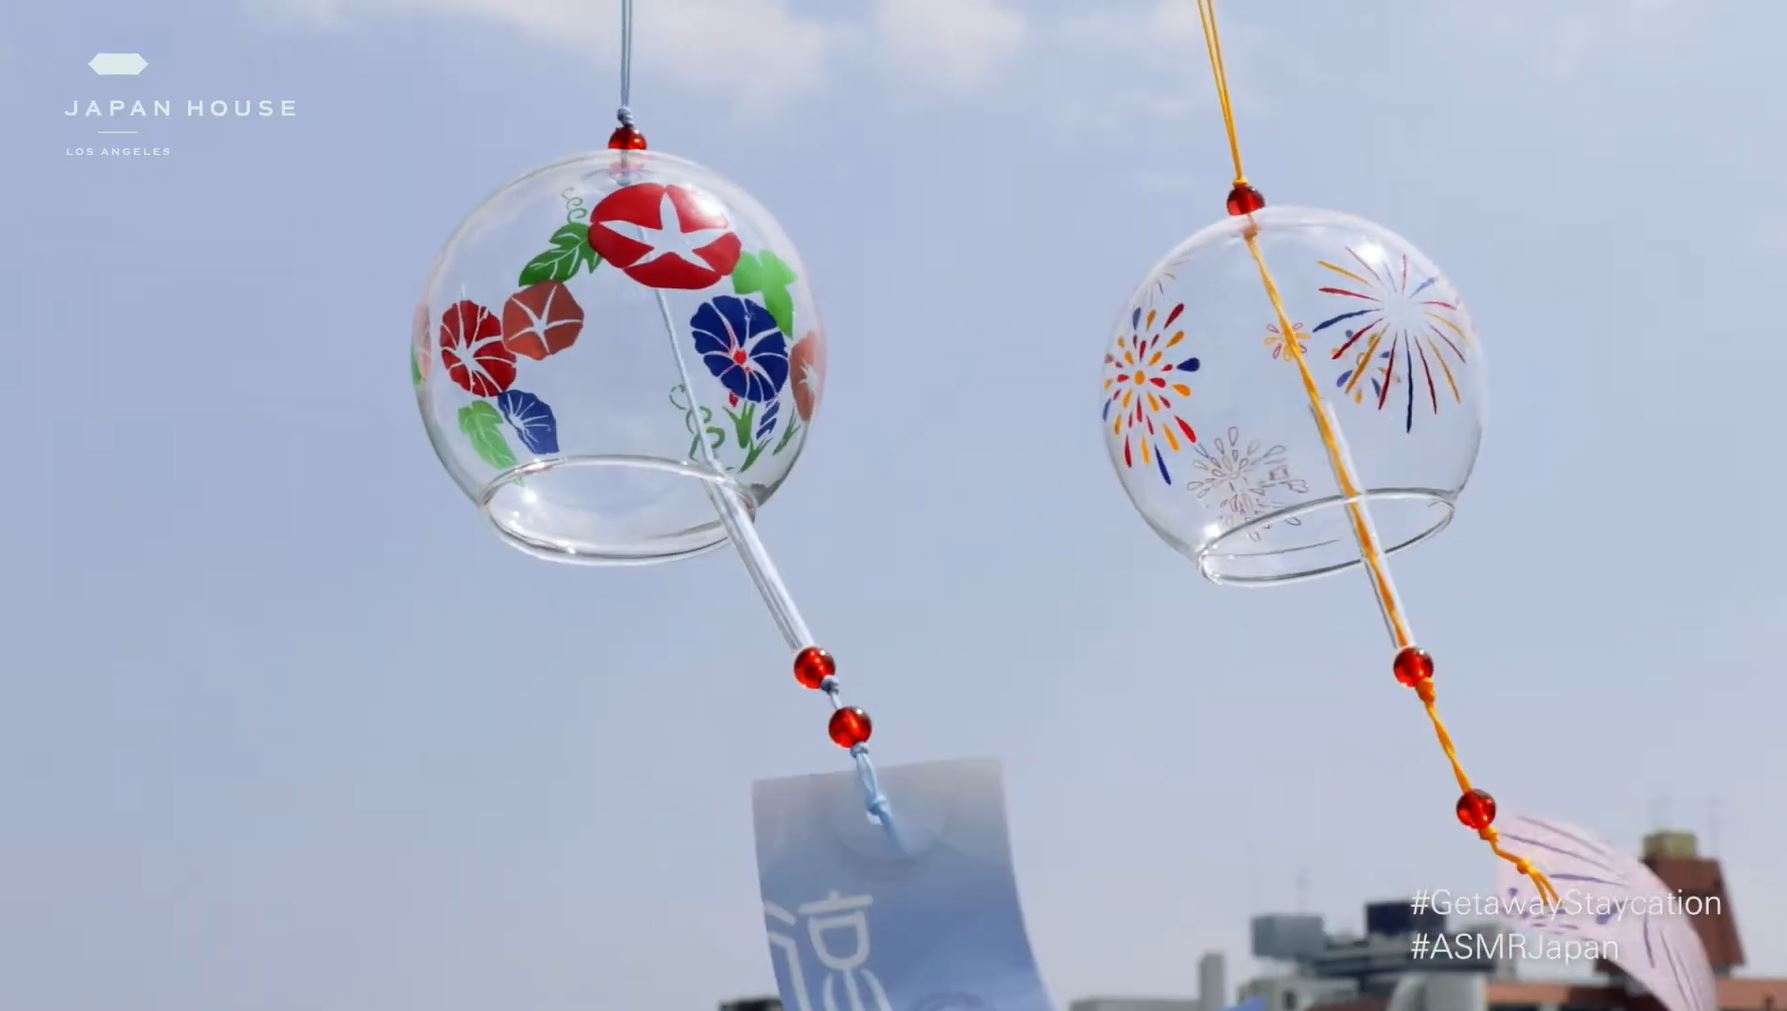 "Cool" Sounds of Furin Wind Chimes